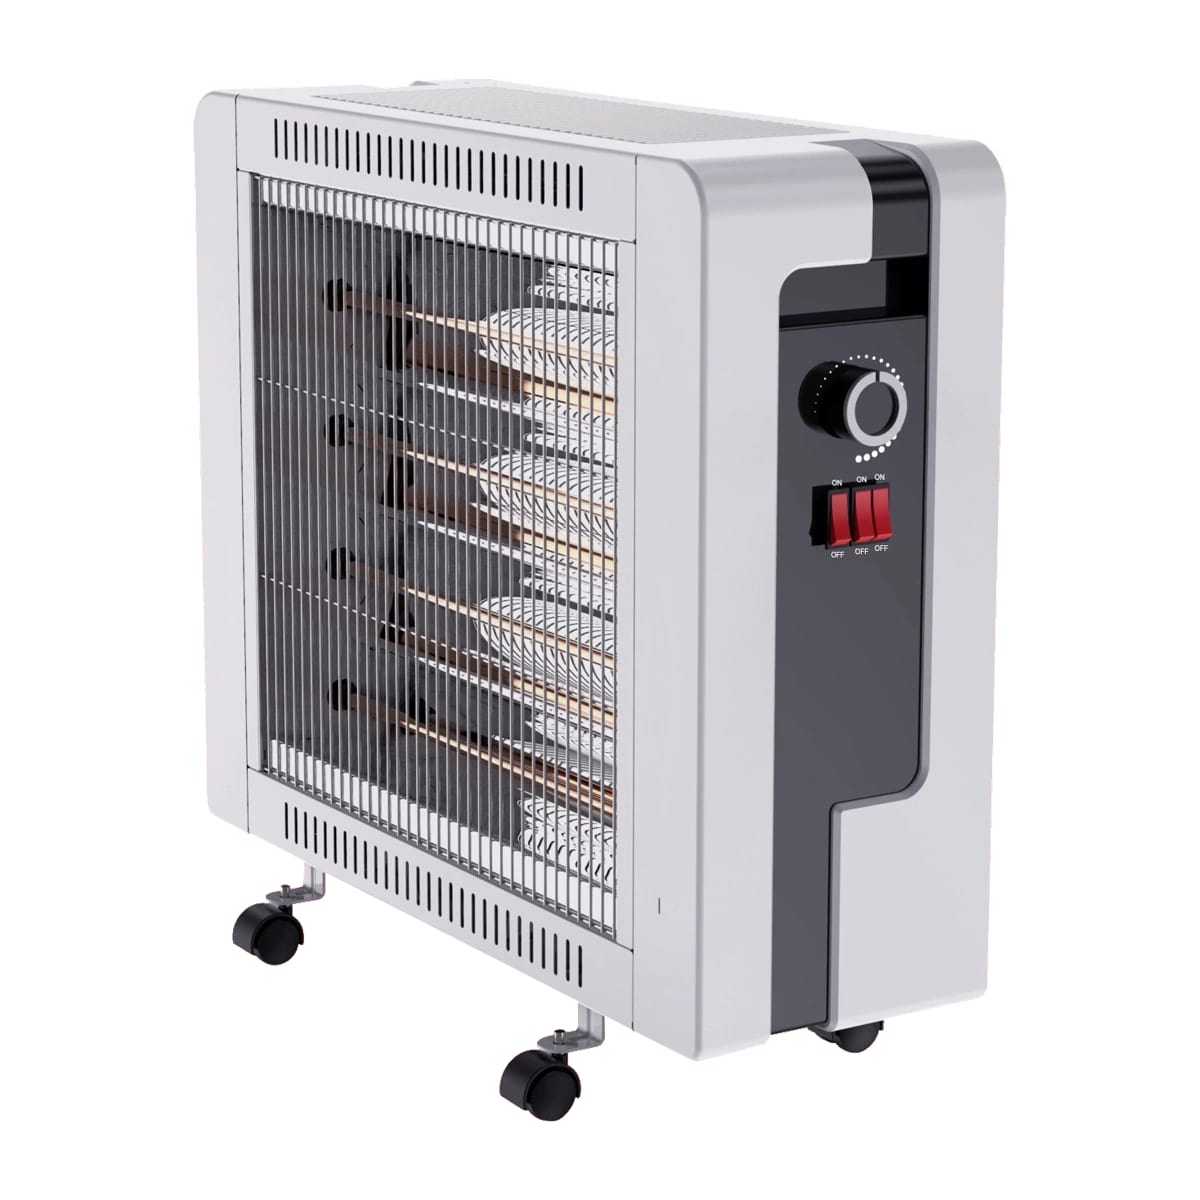 Electromatic Electric Heater, 2400W, 3 Heat Levels, with Water Evaporation System